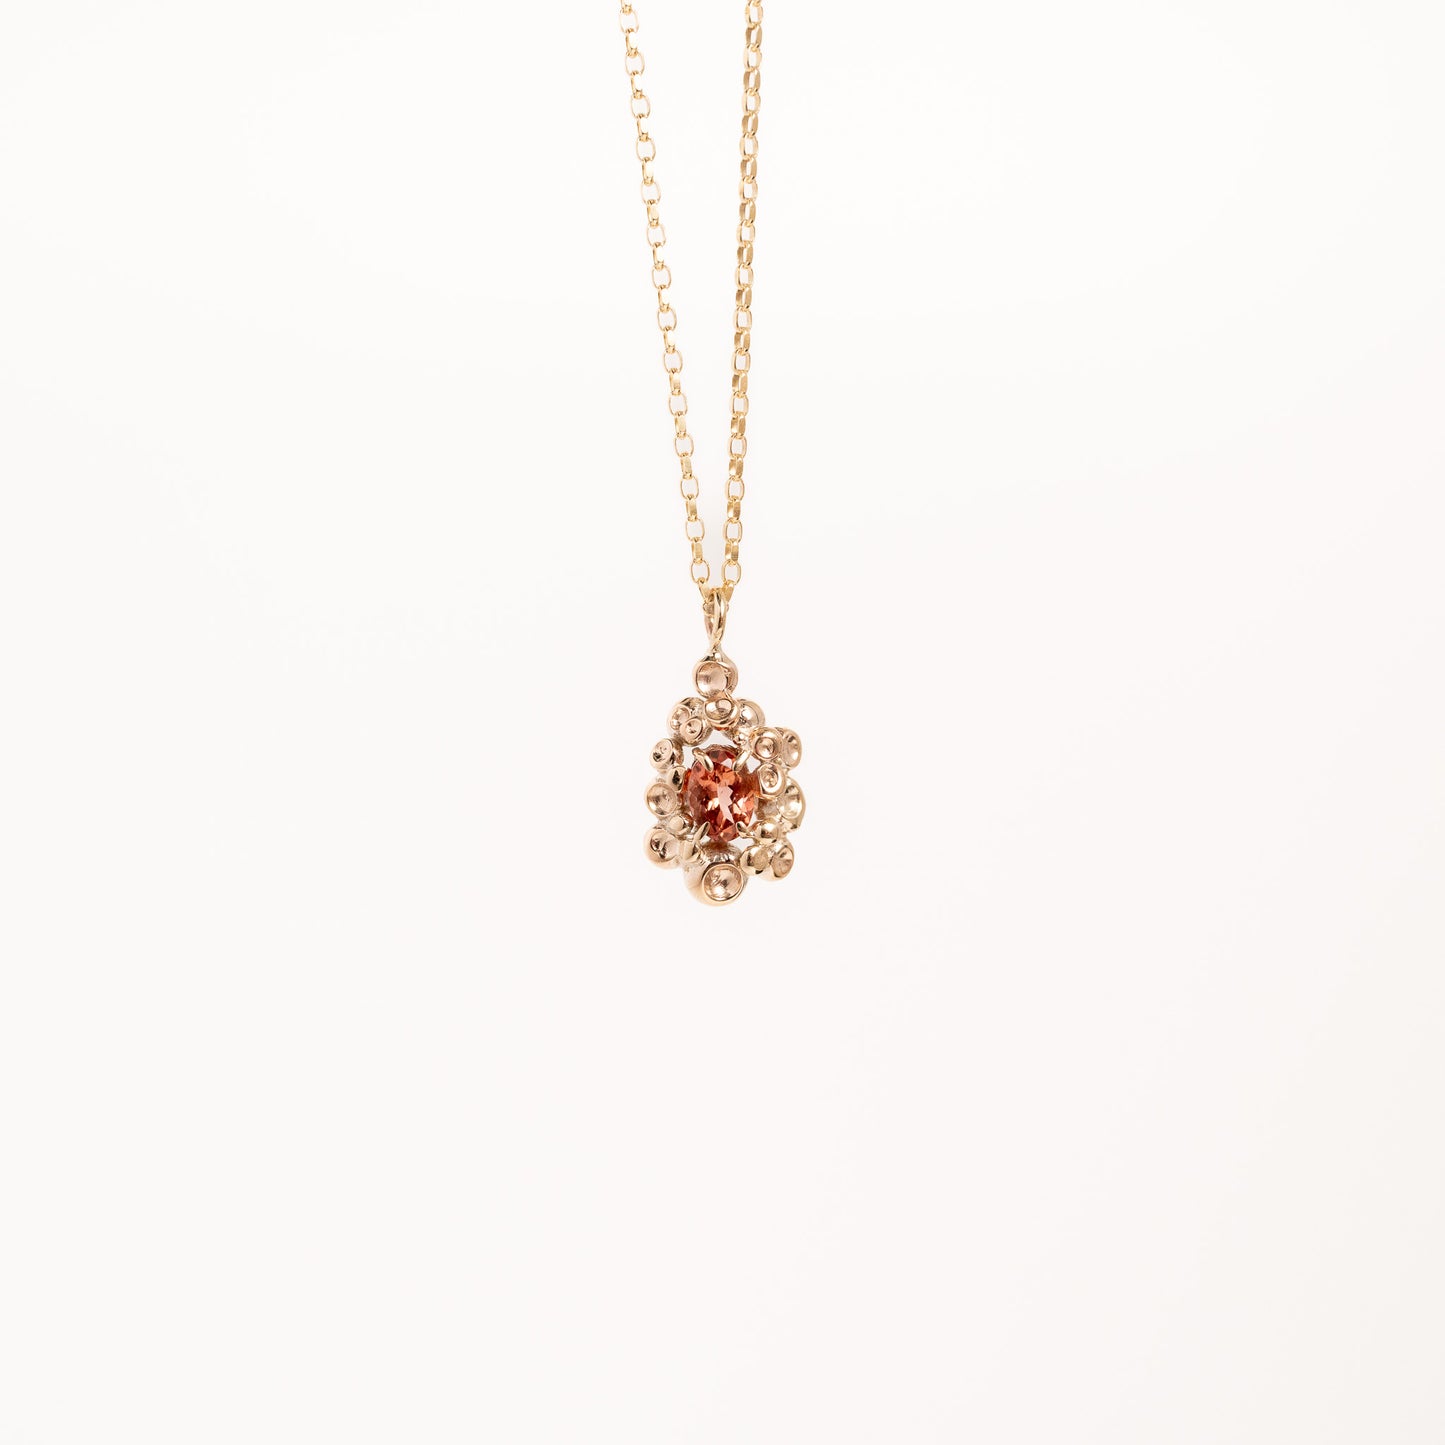 Barnacle Gold Pendant Necklace with Pink Tourmaline